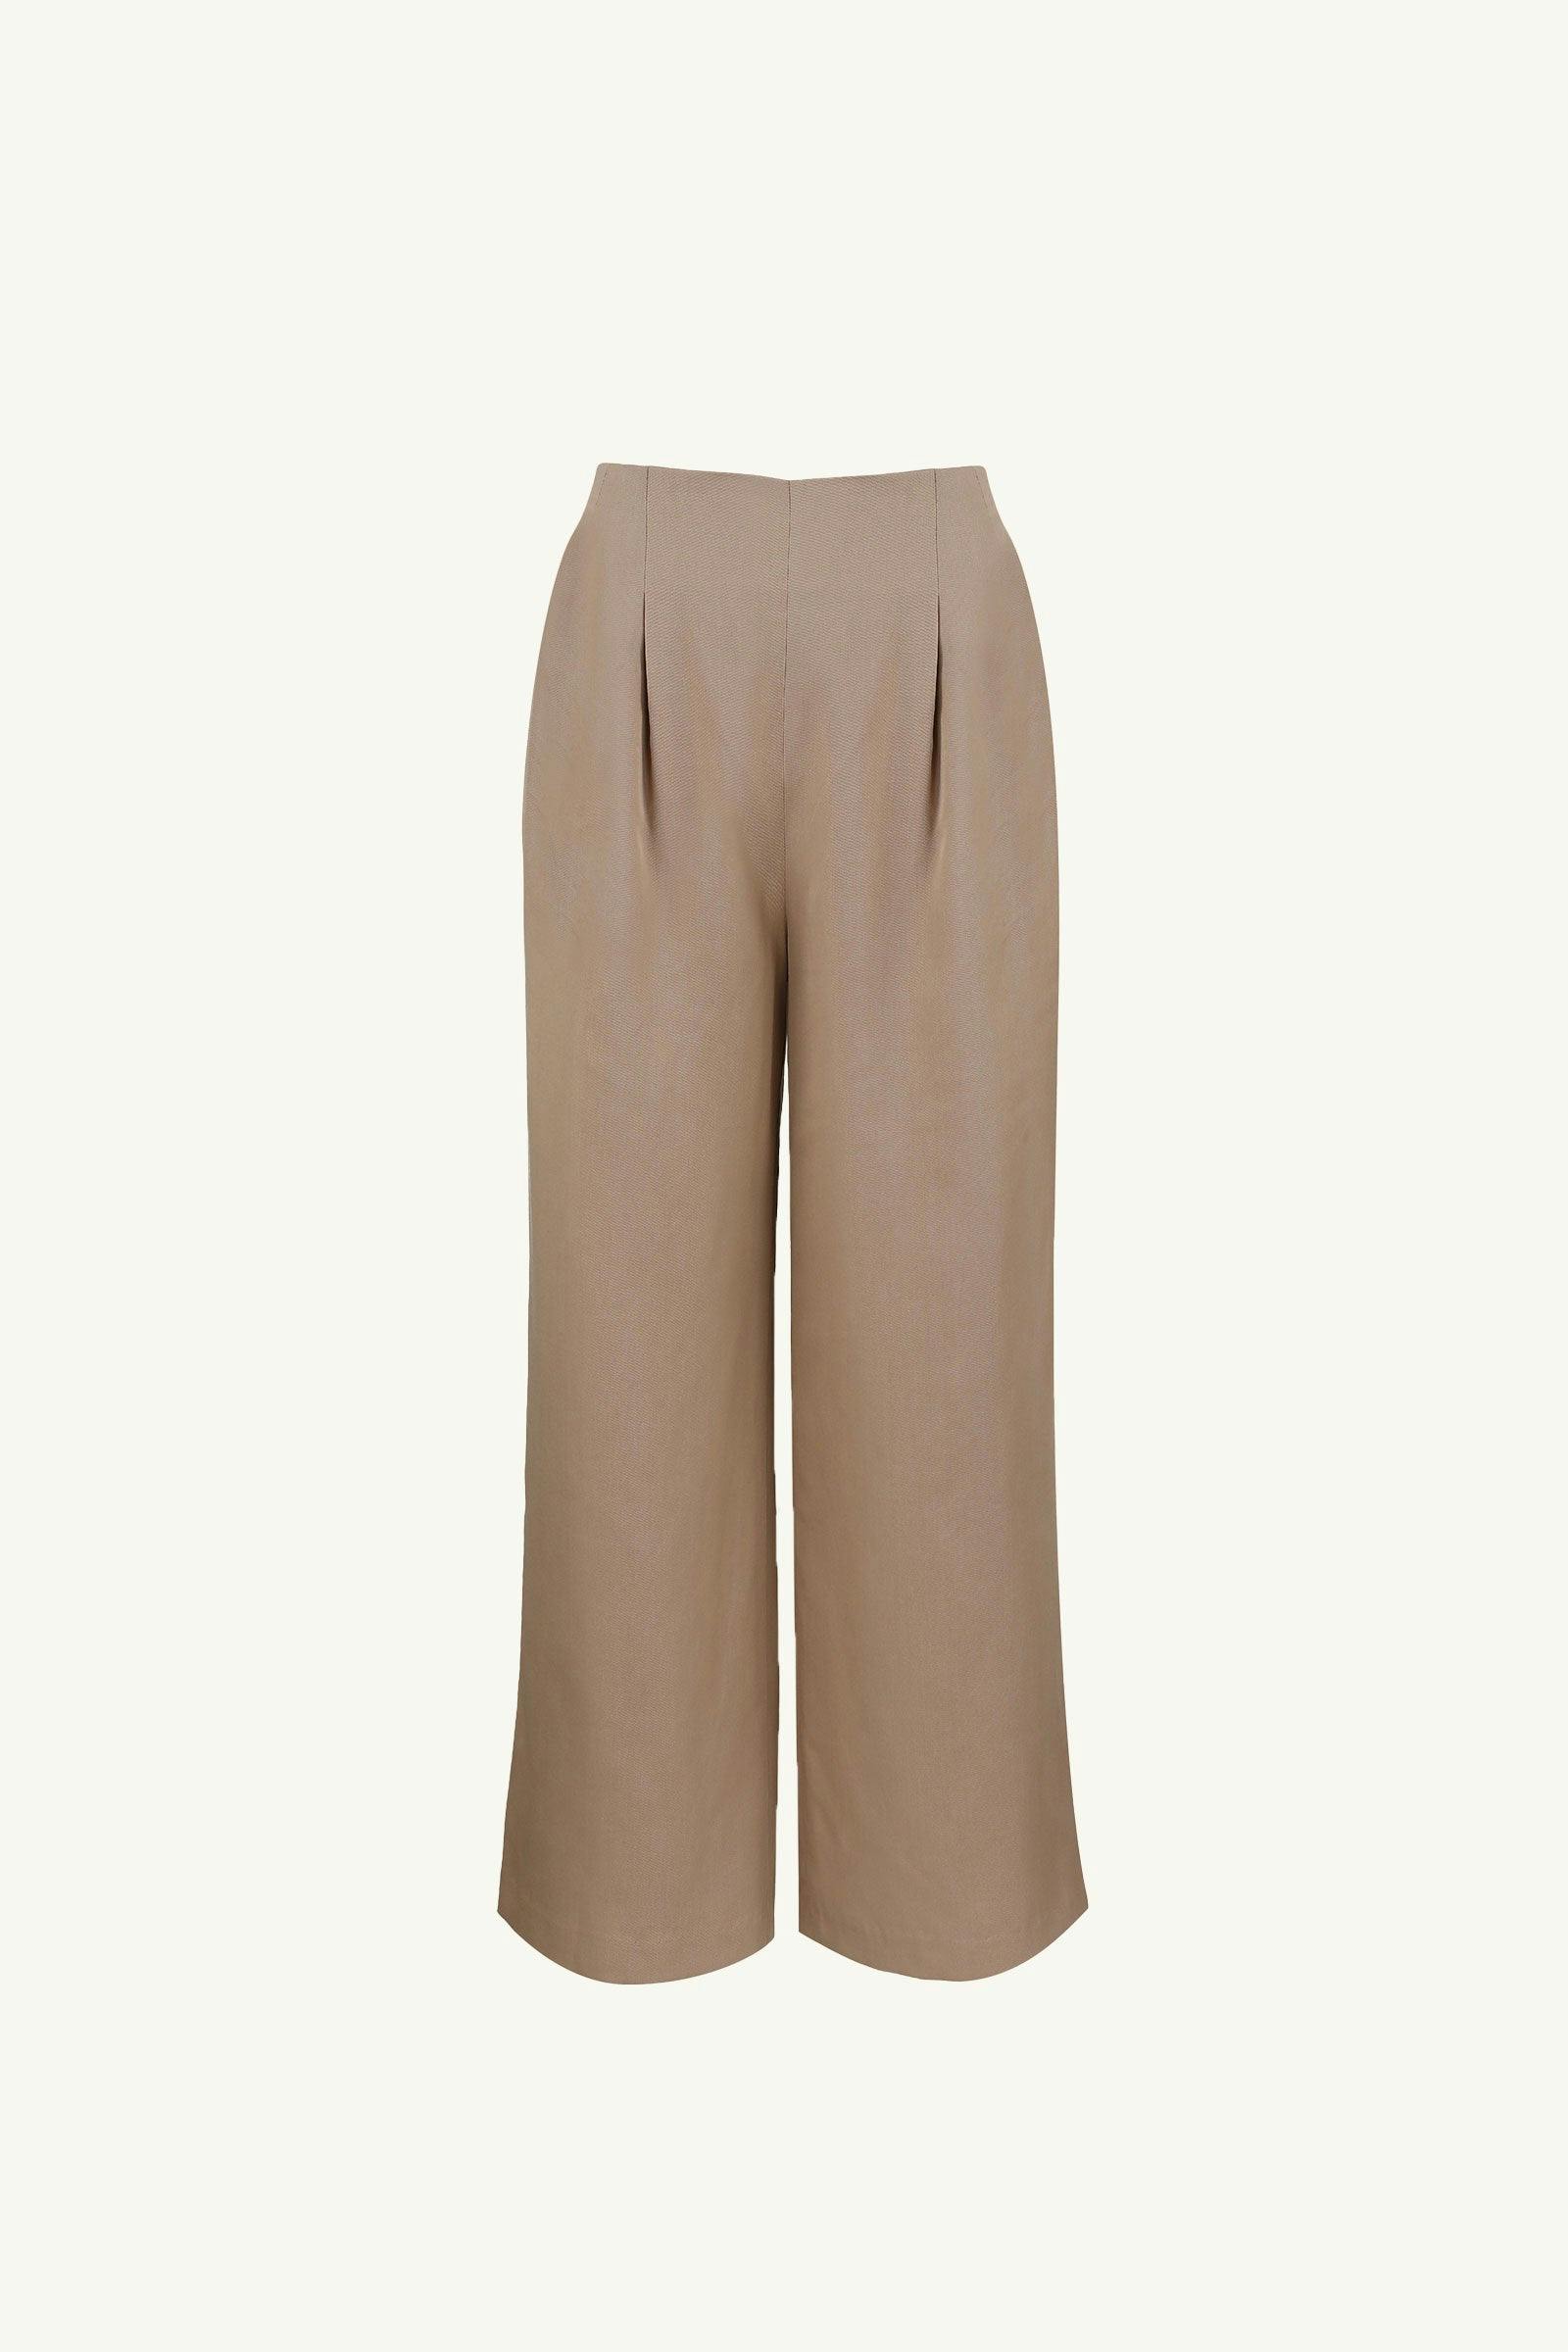 Stretch pink double pleat essential Trousers